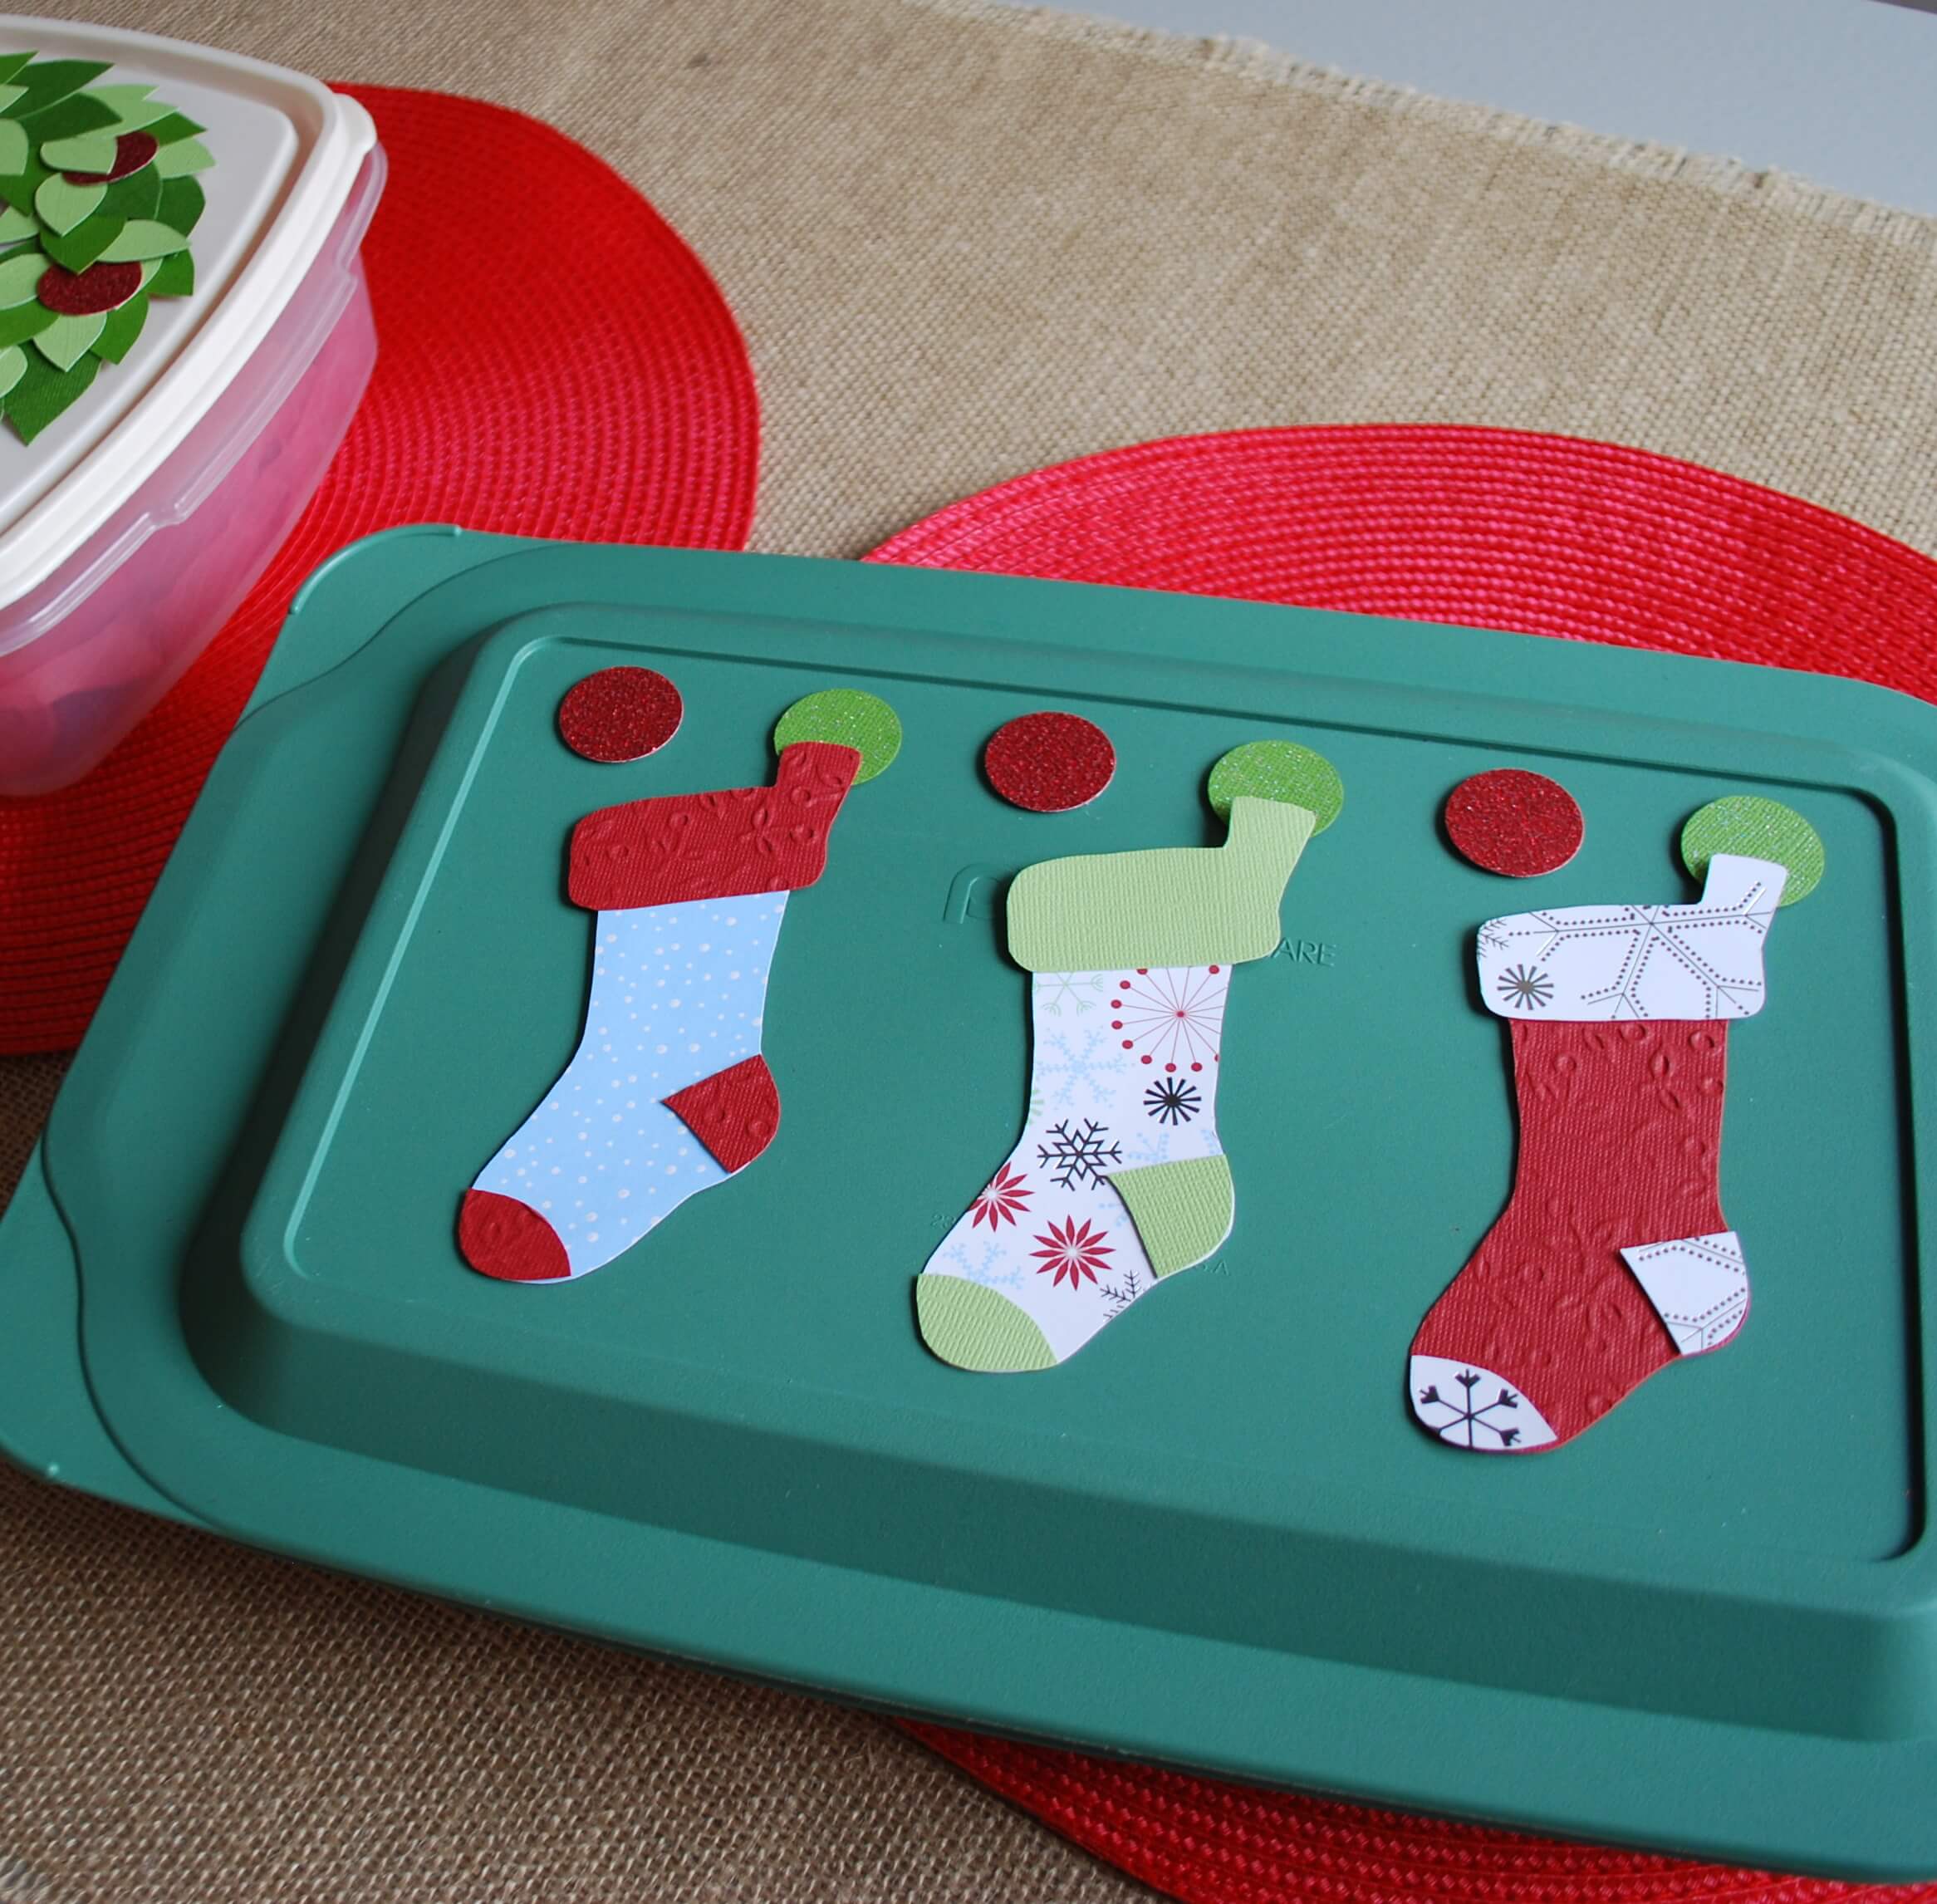 Decorate tupperware containers with stockings for Christmas cookie exhanges and potluck dinners